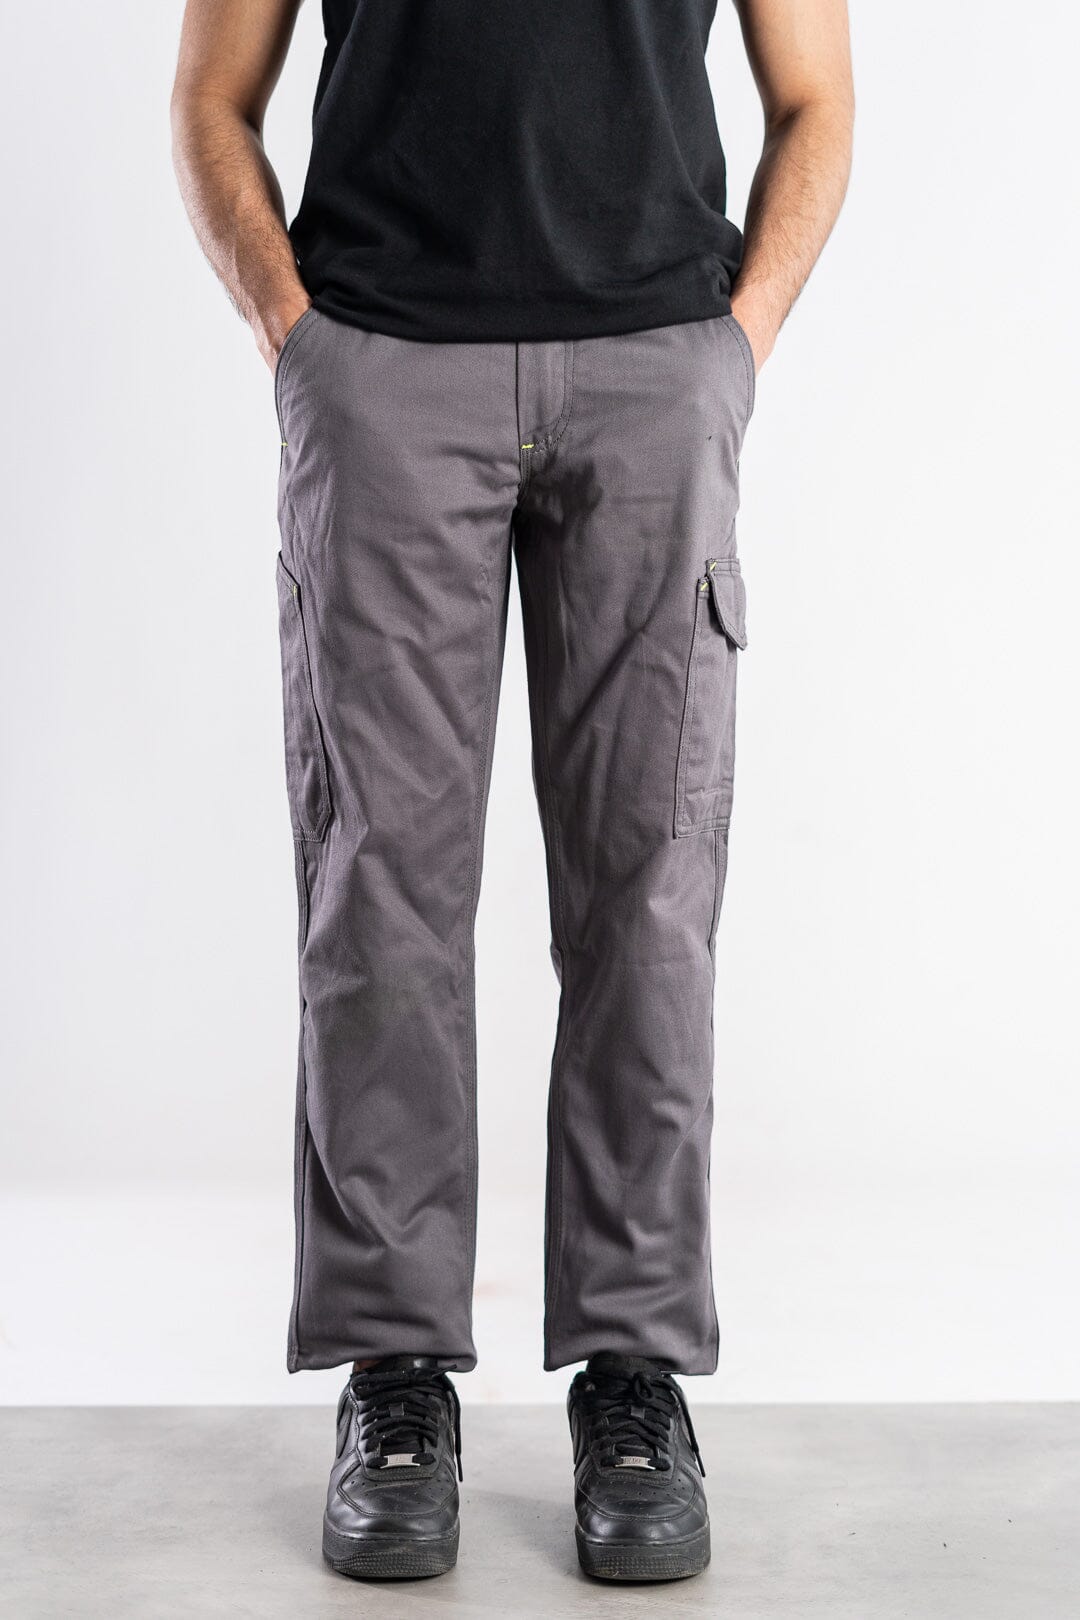 Pants with Built-In Liners | birddogs